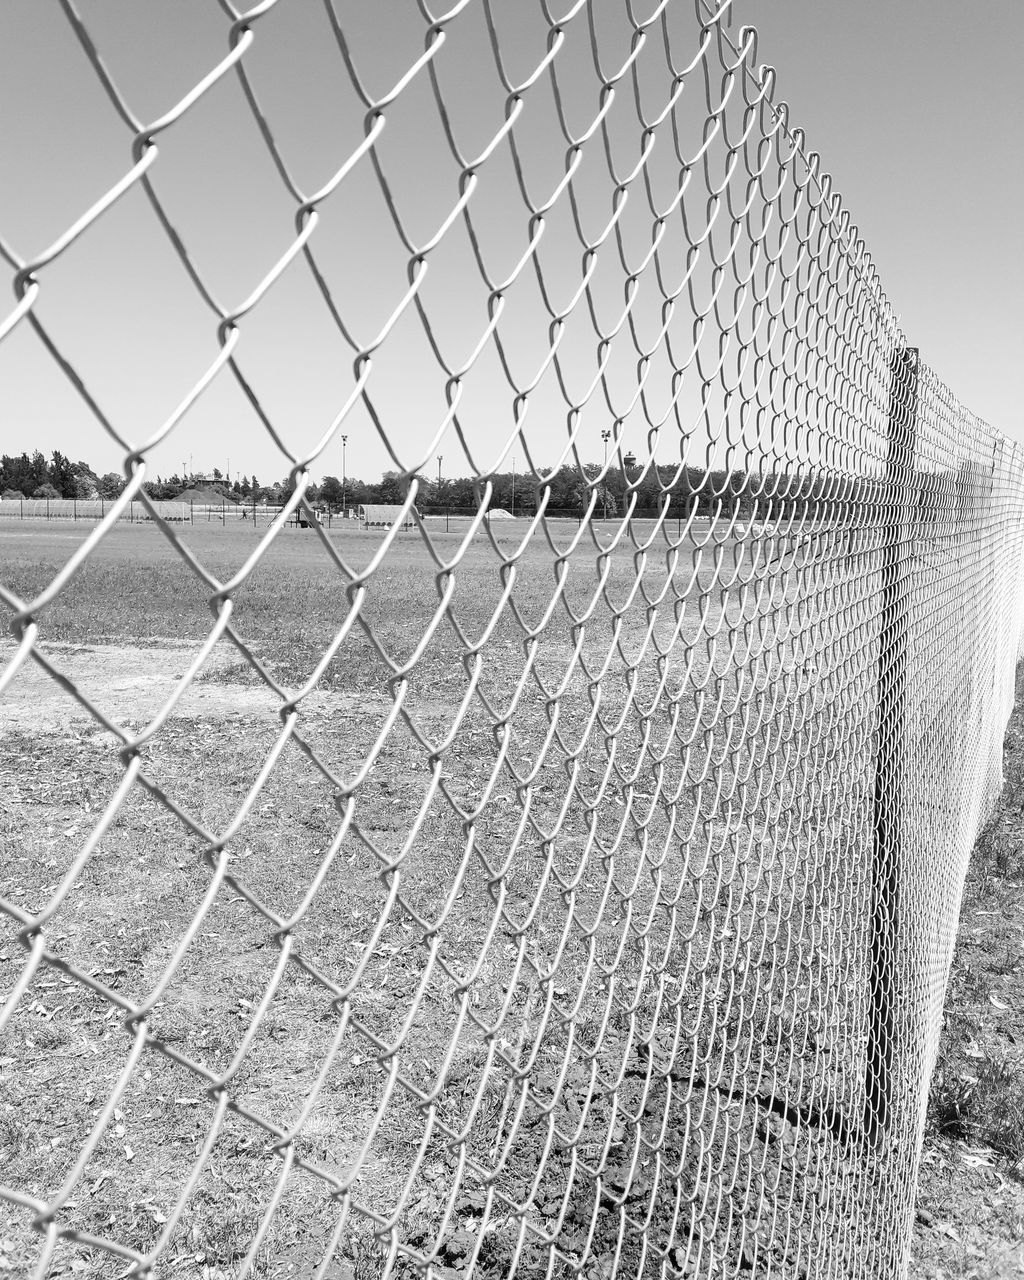 CLOSE UP OF CHAINLINK FENCE AGAINST SKY